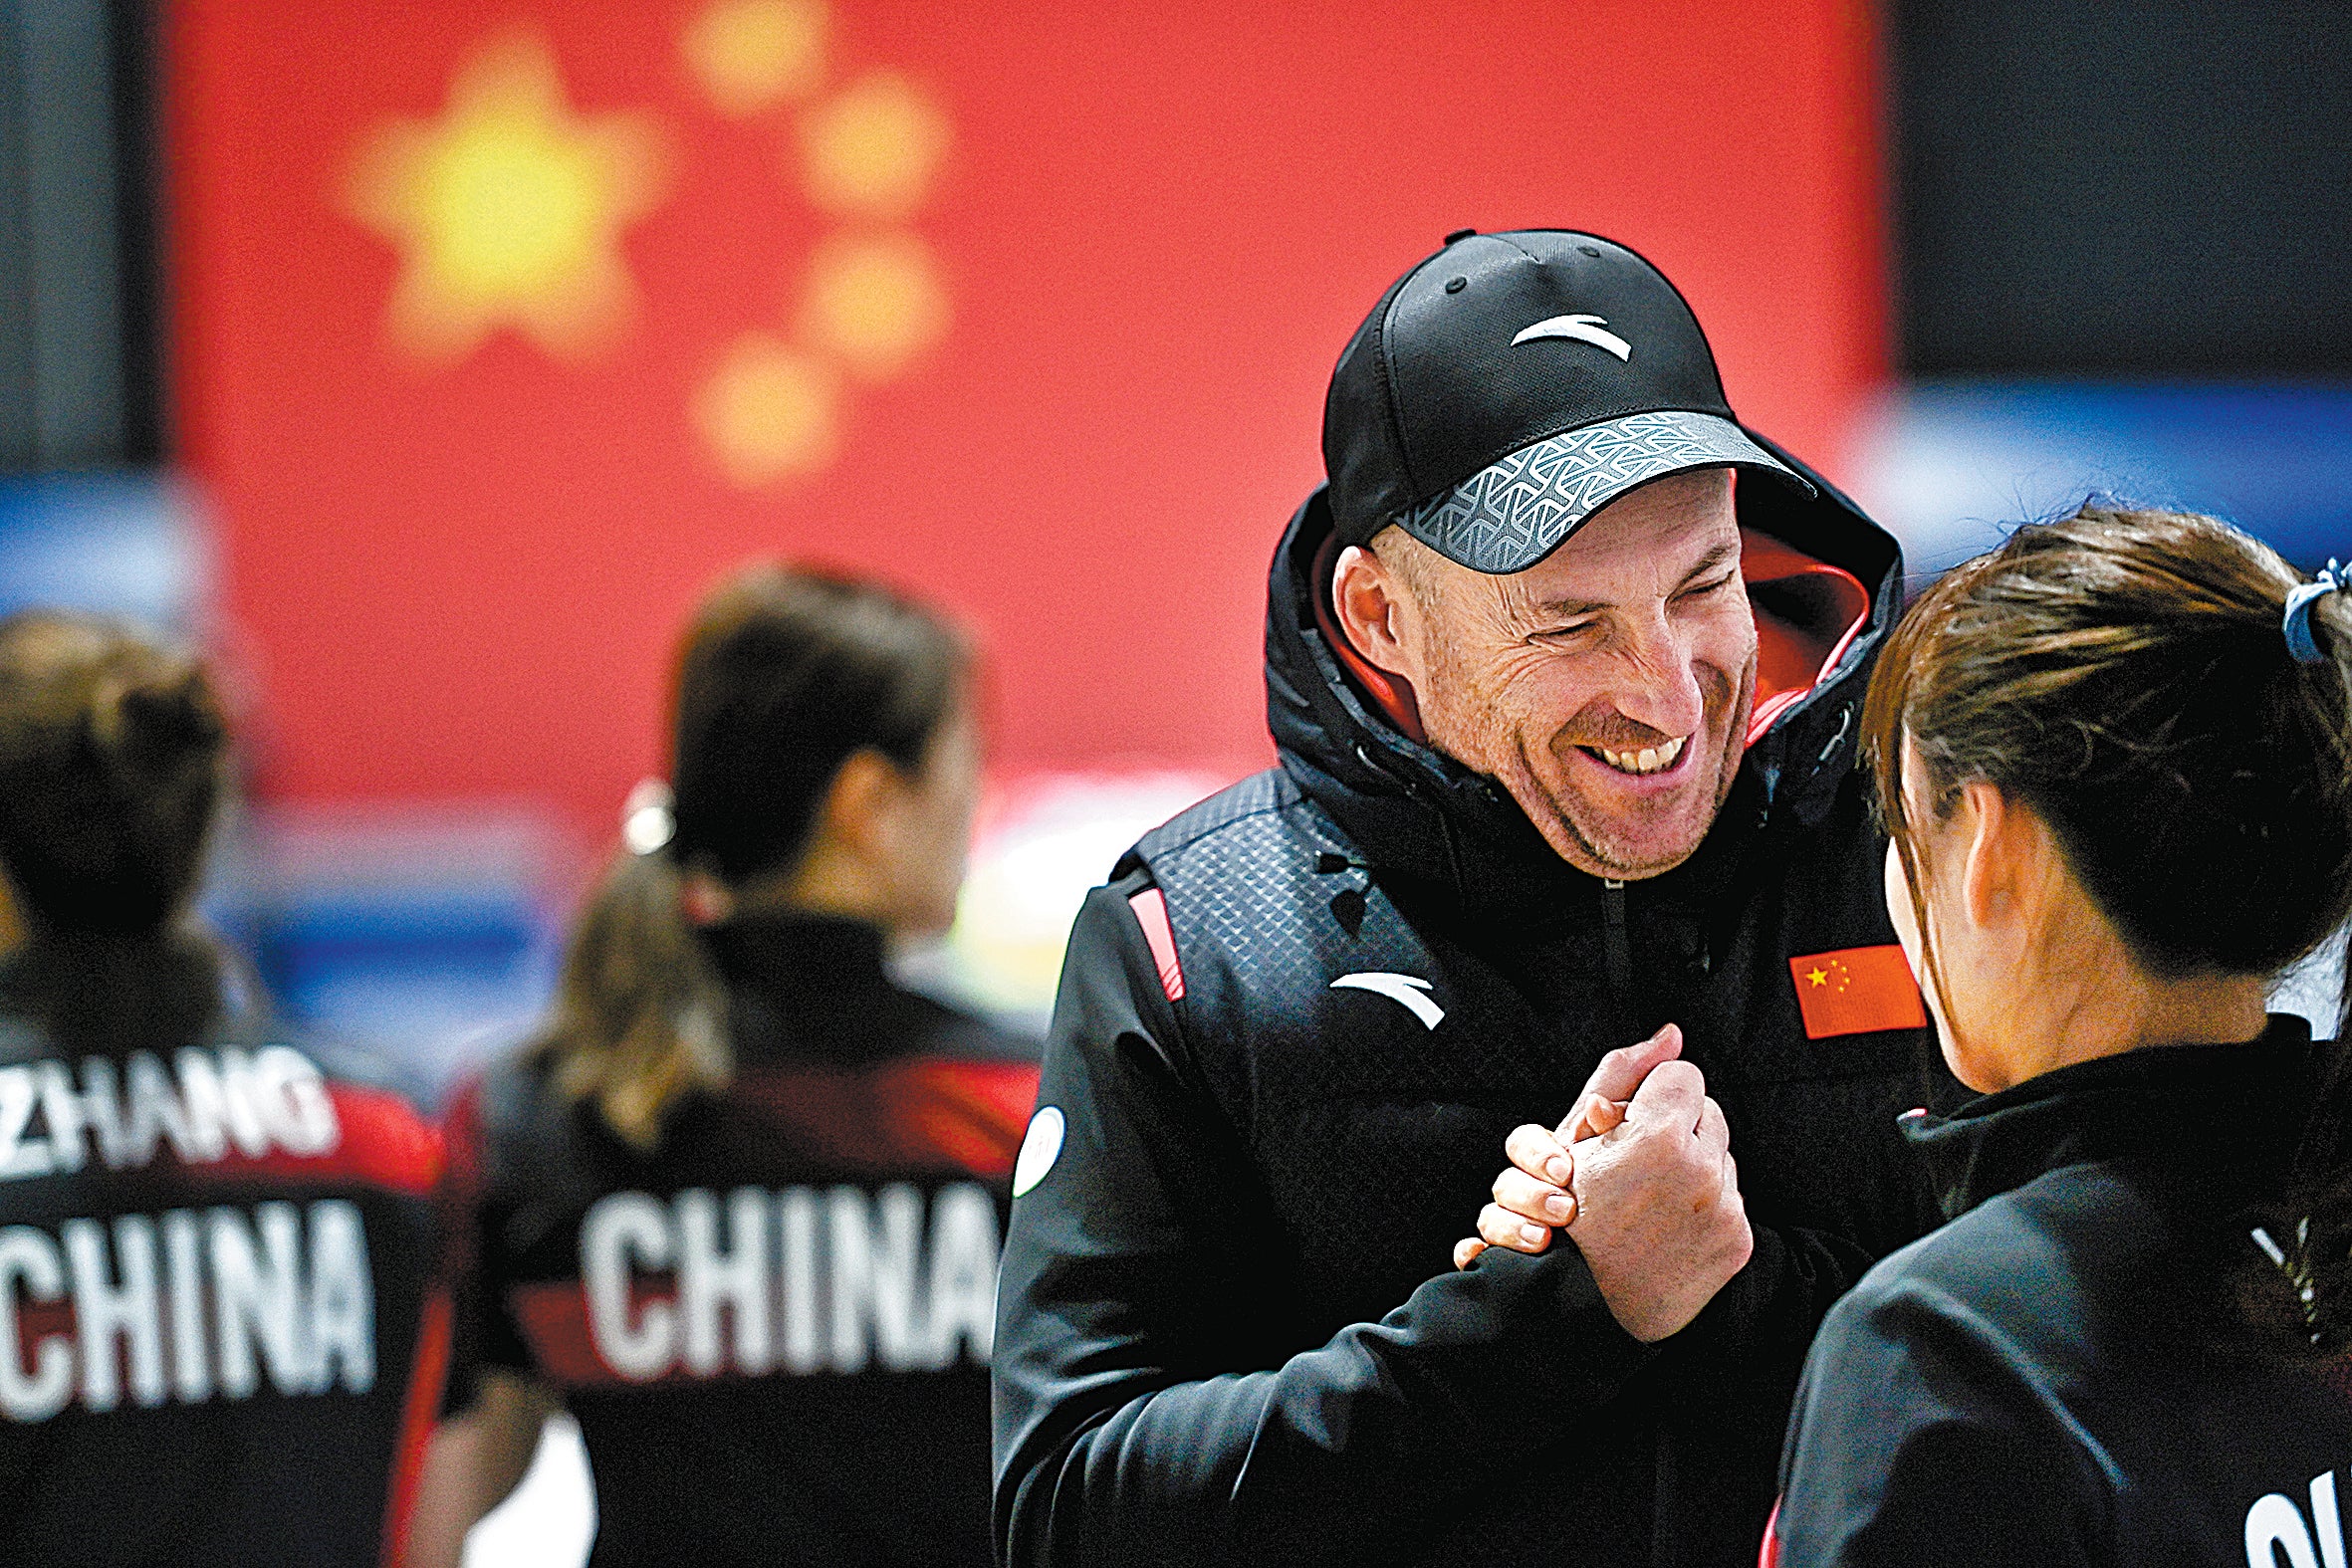 China’s women’s head coach Marco Mariani of Italy says young skip Han Yu is well-equipped to lead the host’s challenge at next year’s Olympic Games